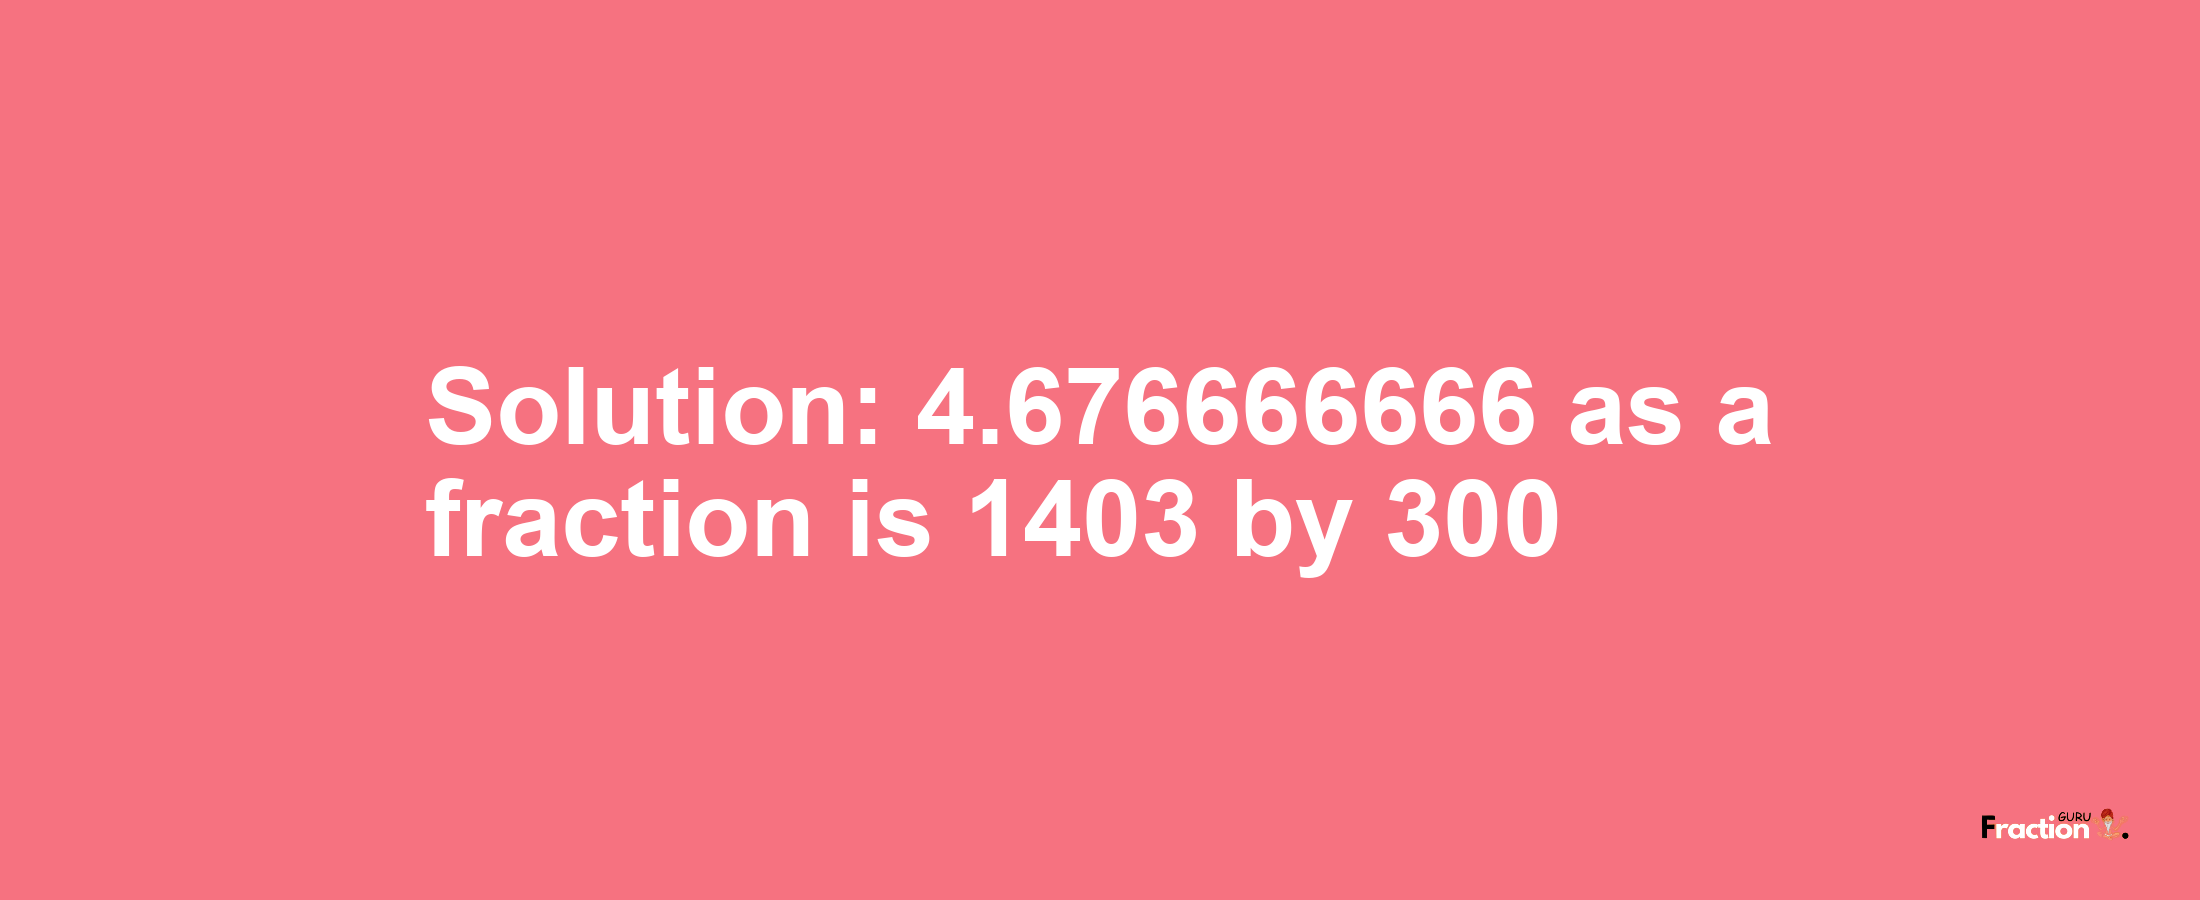 Solution:4.676666666 as a fraction is 1403/300